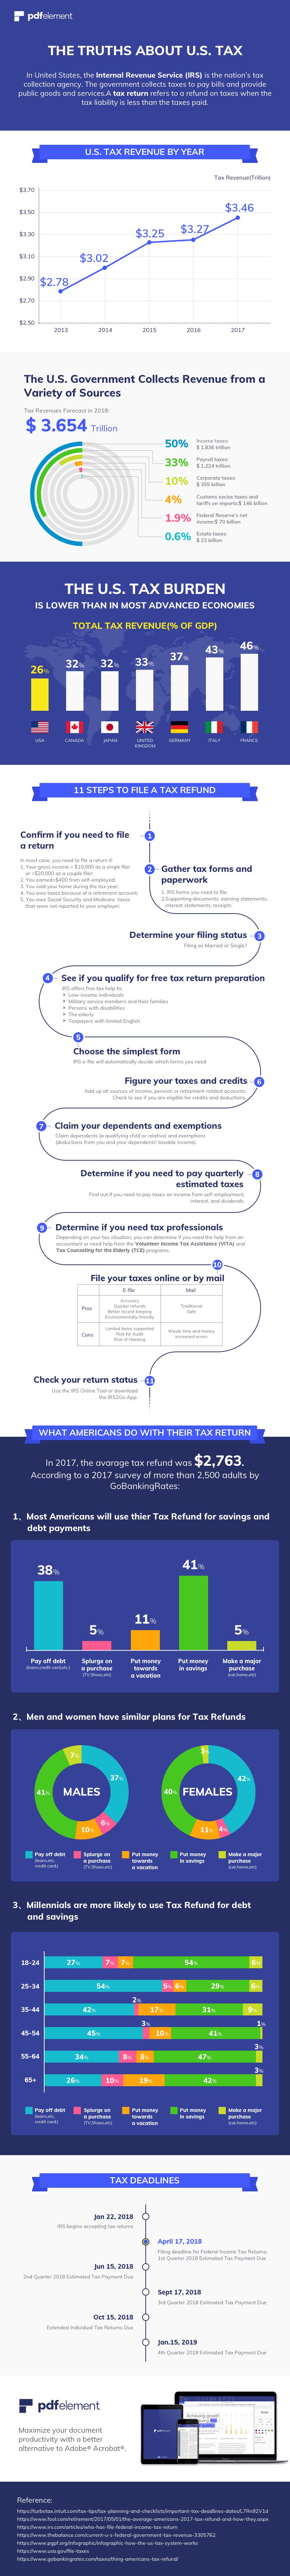 infographic truths about filing tax in US